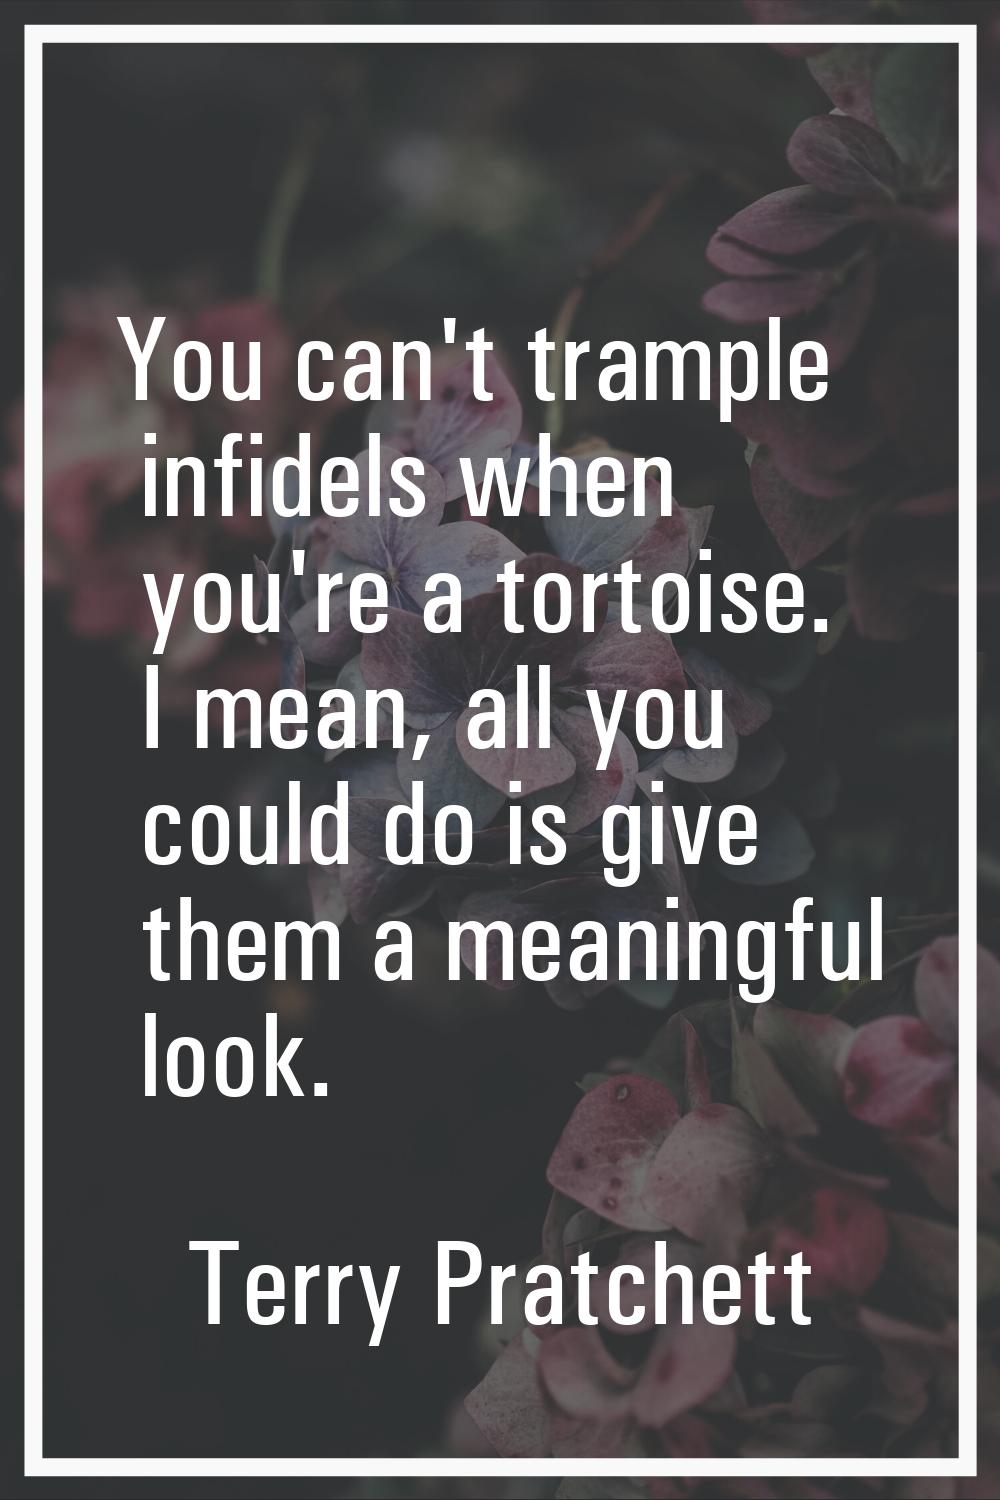 You can't trample infidels when you're a tortoise. I mean, all you could do is give them a meaningf